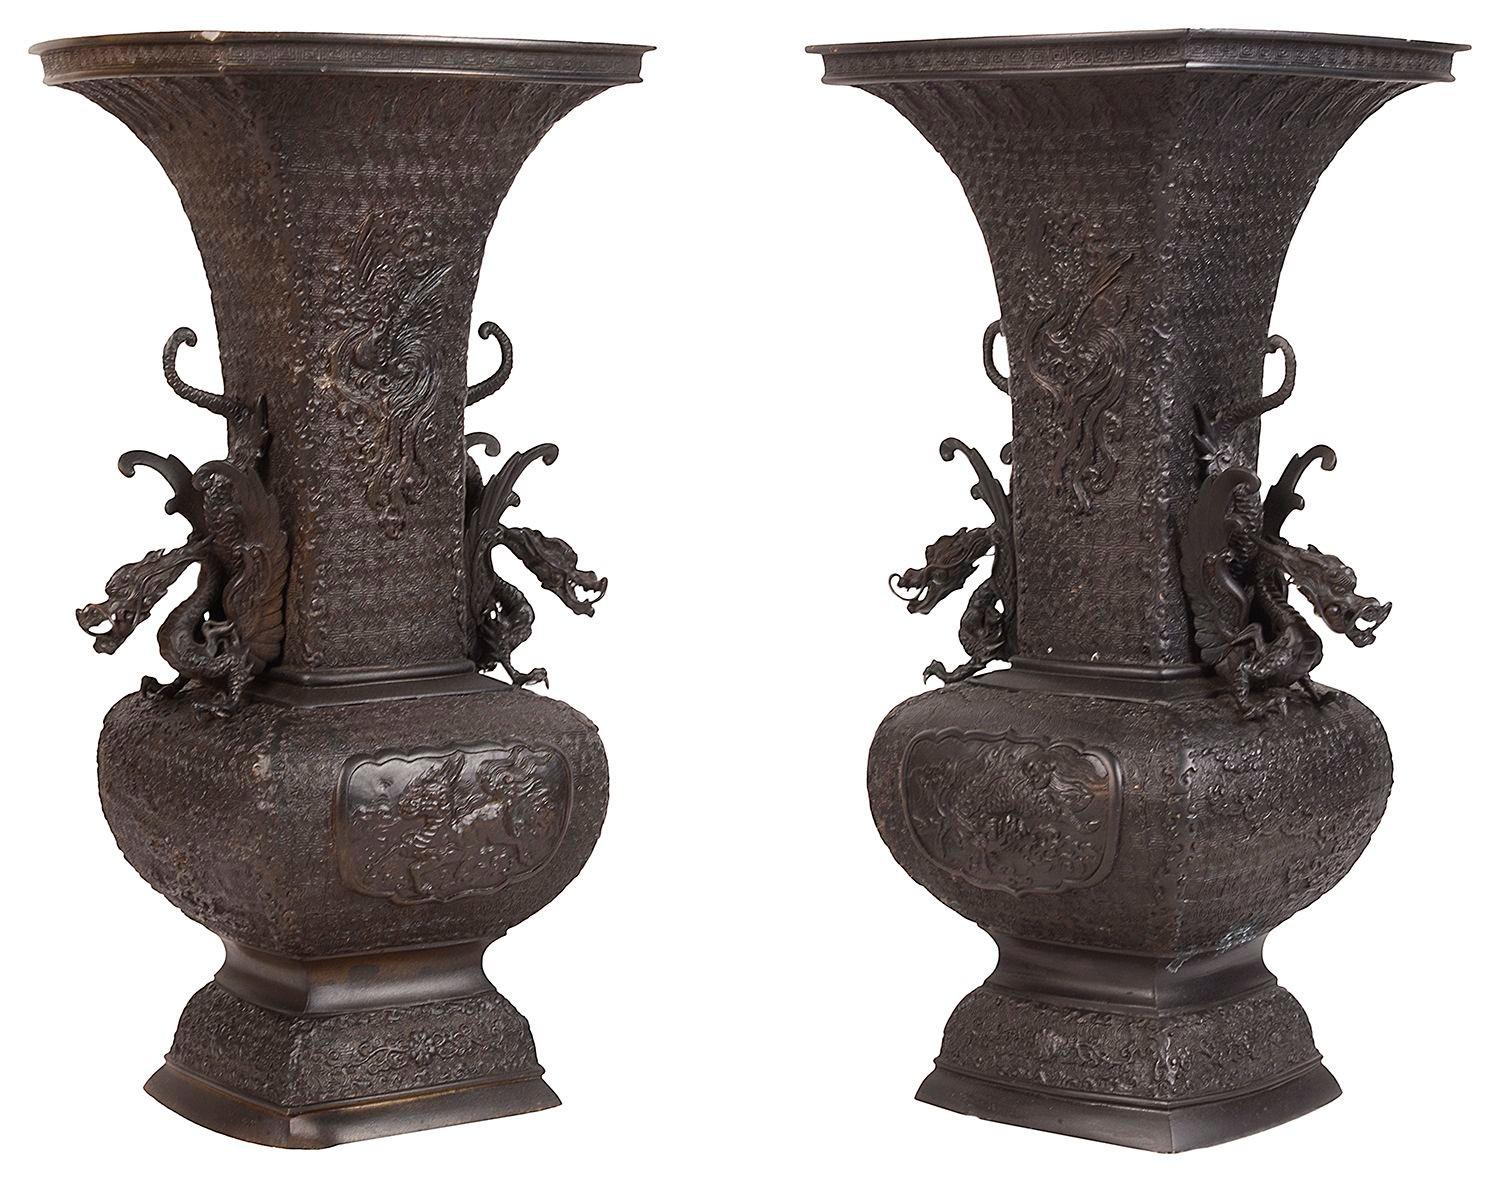 A very good quality pair of late 19th century Japanese Meiji period (1868-1912) Bronze vases / lamps. Having wonderful classical Embossed decoration with inset panels depicting mythical creatures and dragon handles, Signed to the base.
 
 
Batch